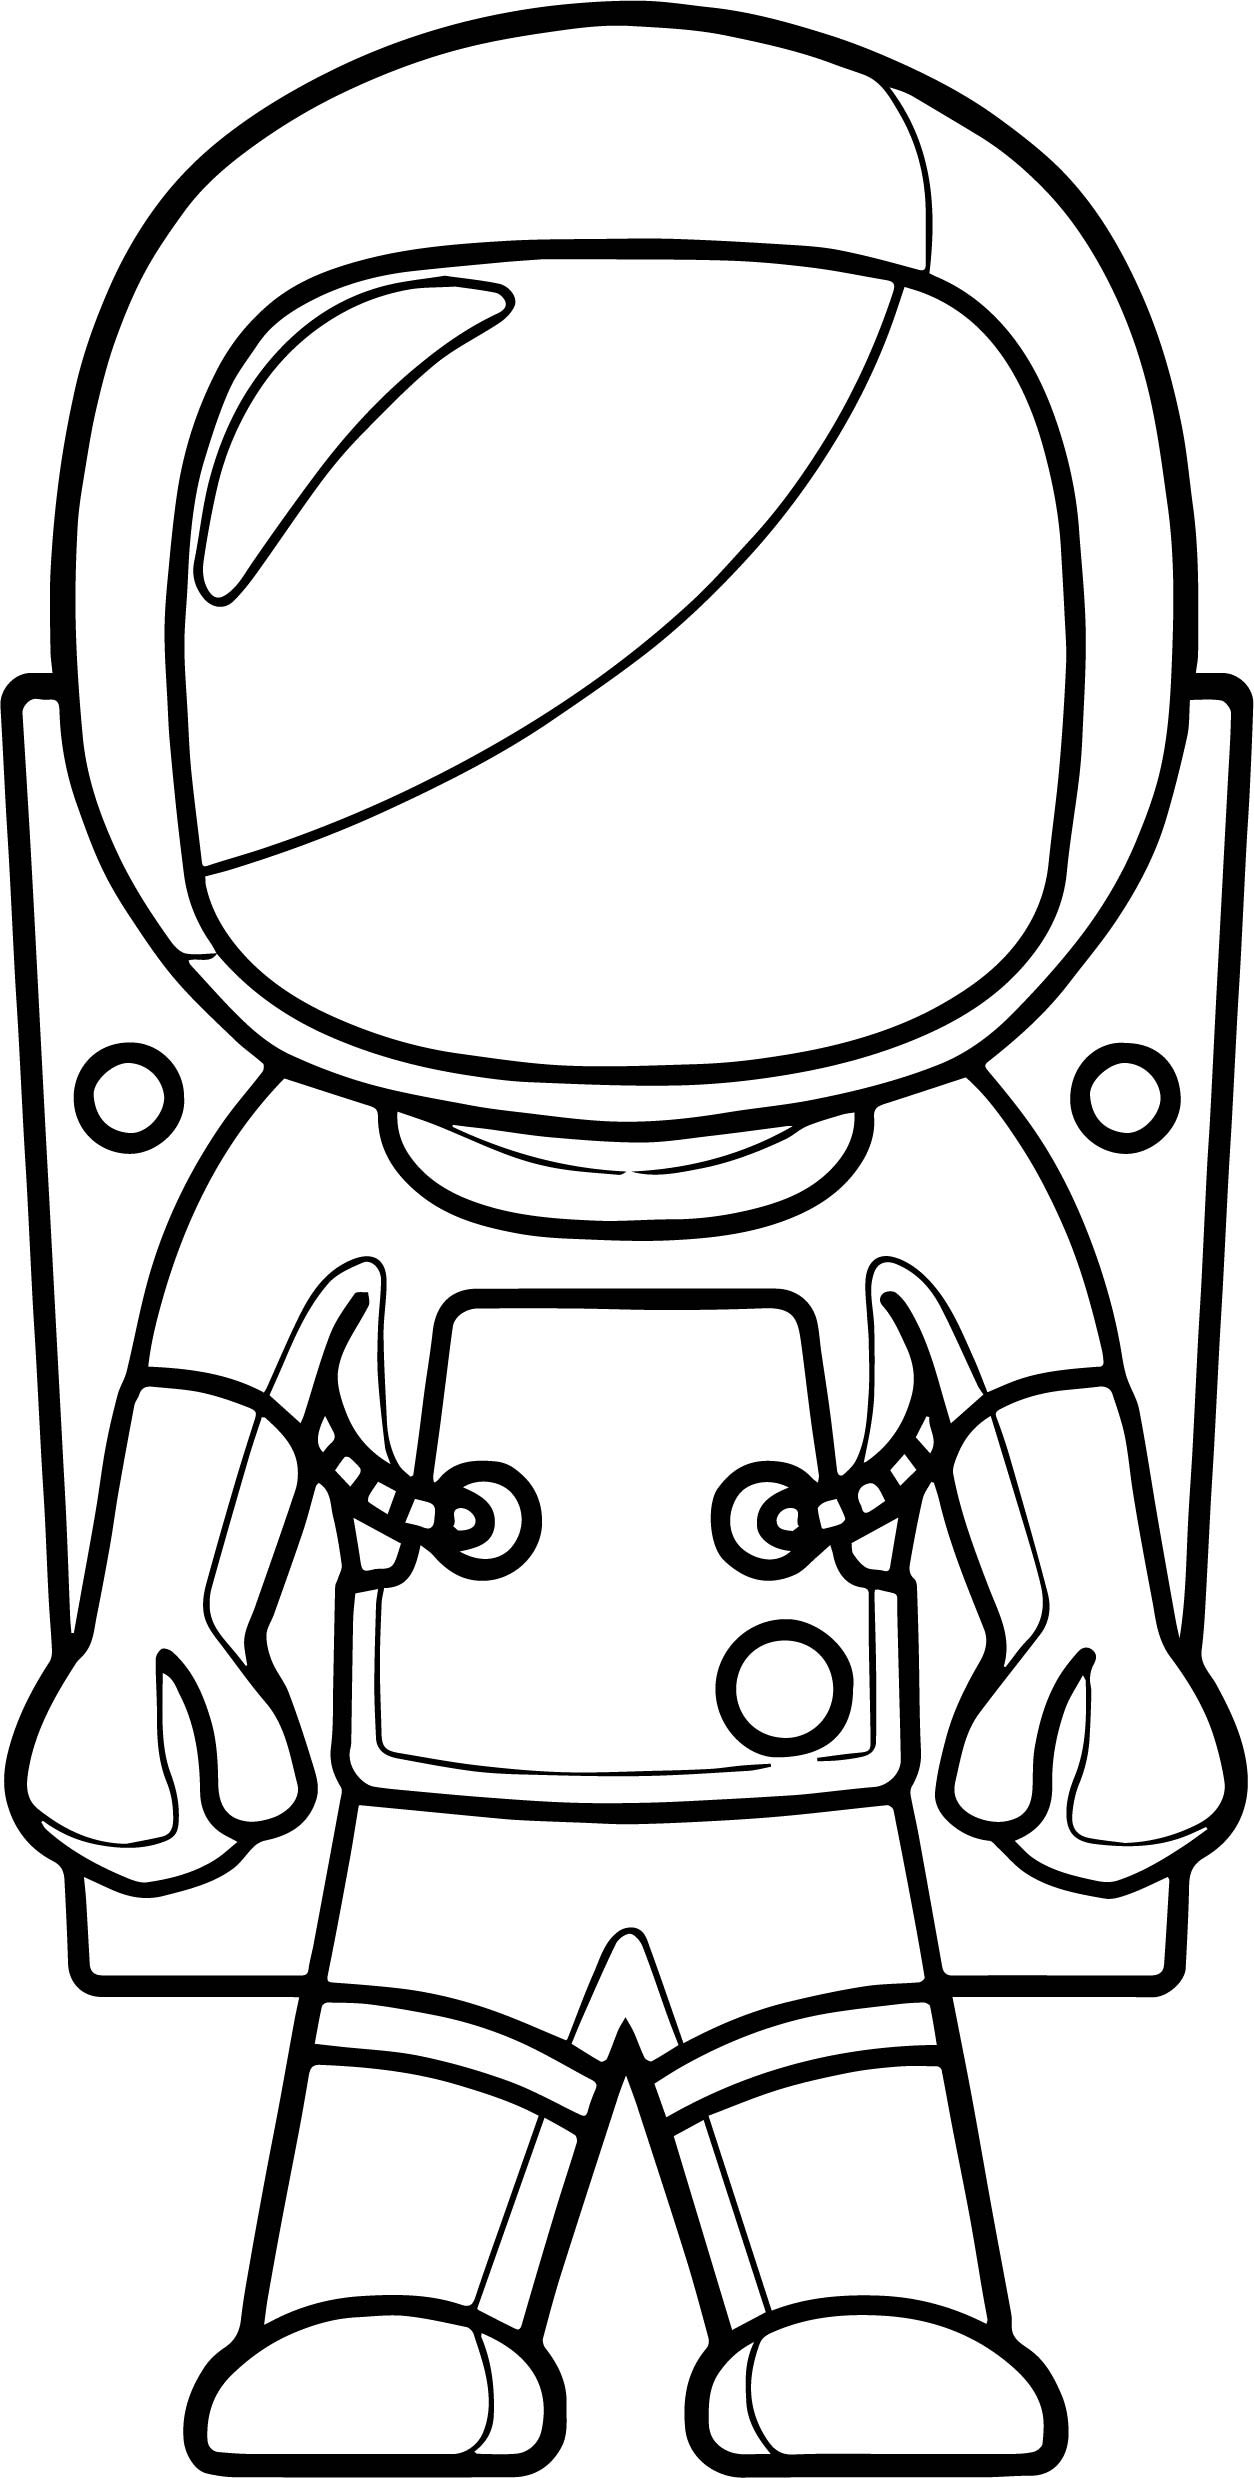 Free Printable Astronaut Coloring Pages Printable Templates